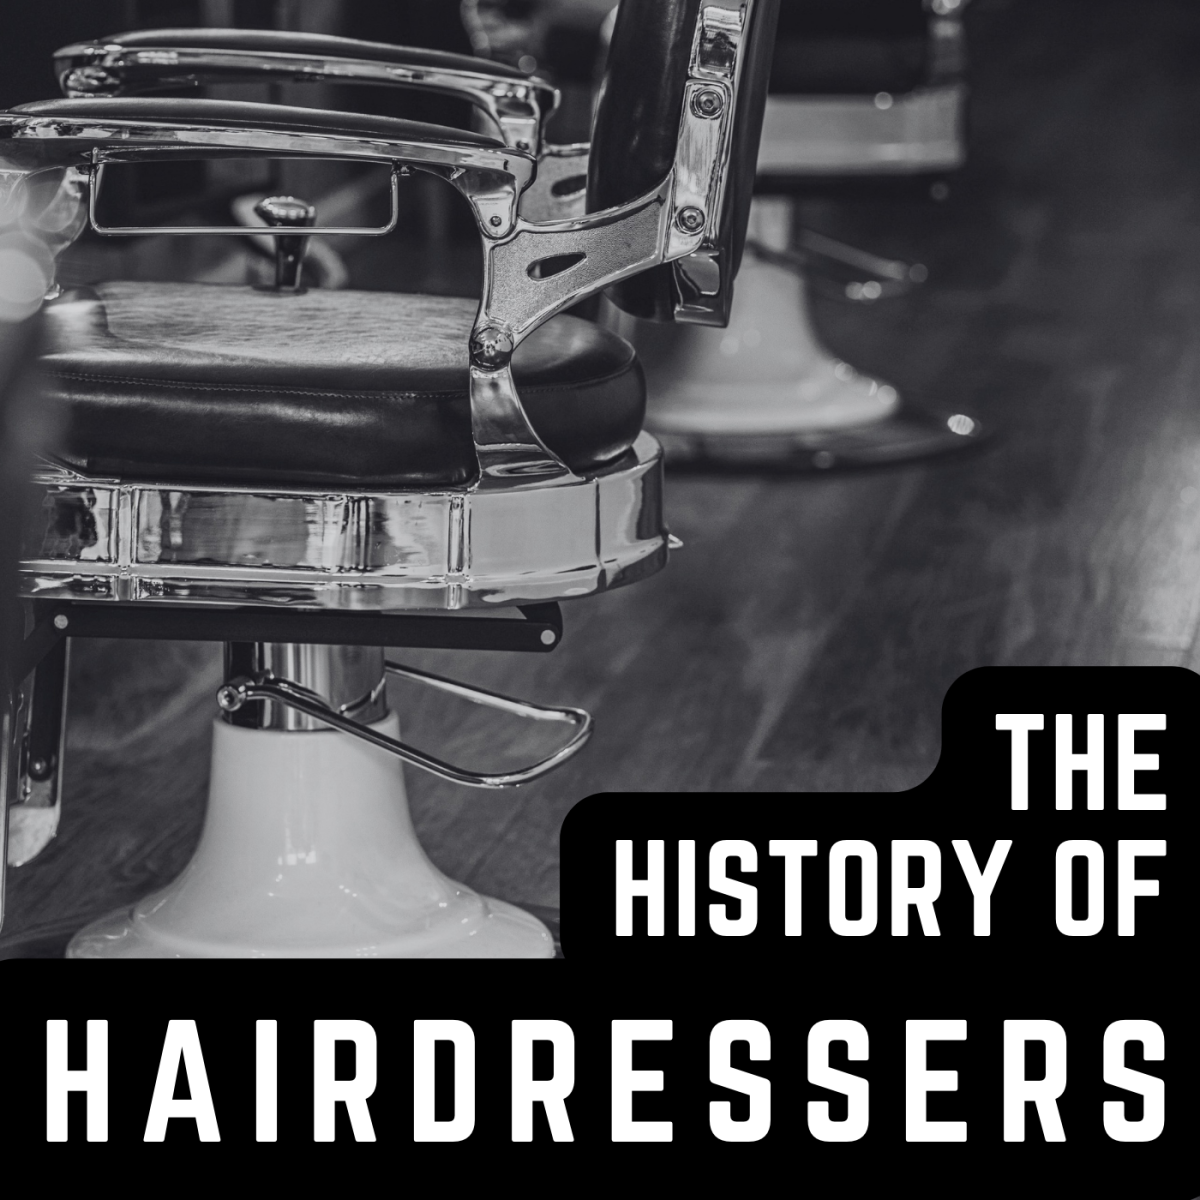 The history of hairdressers.